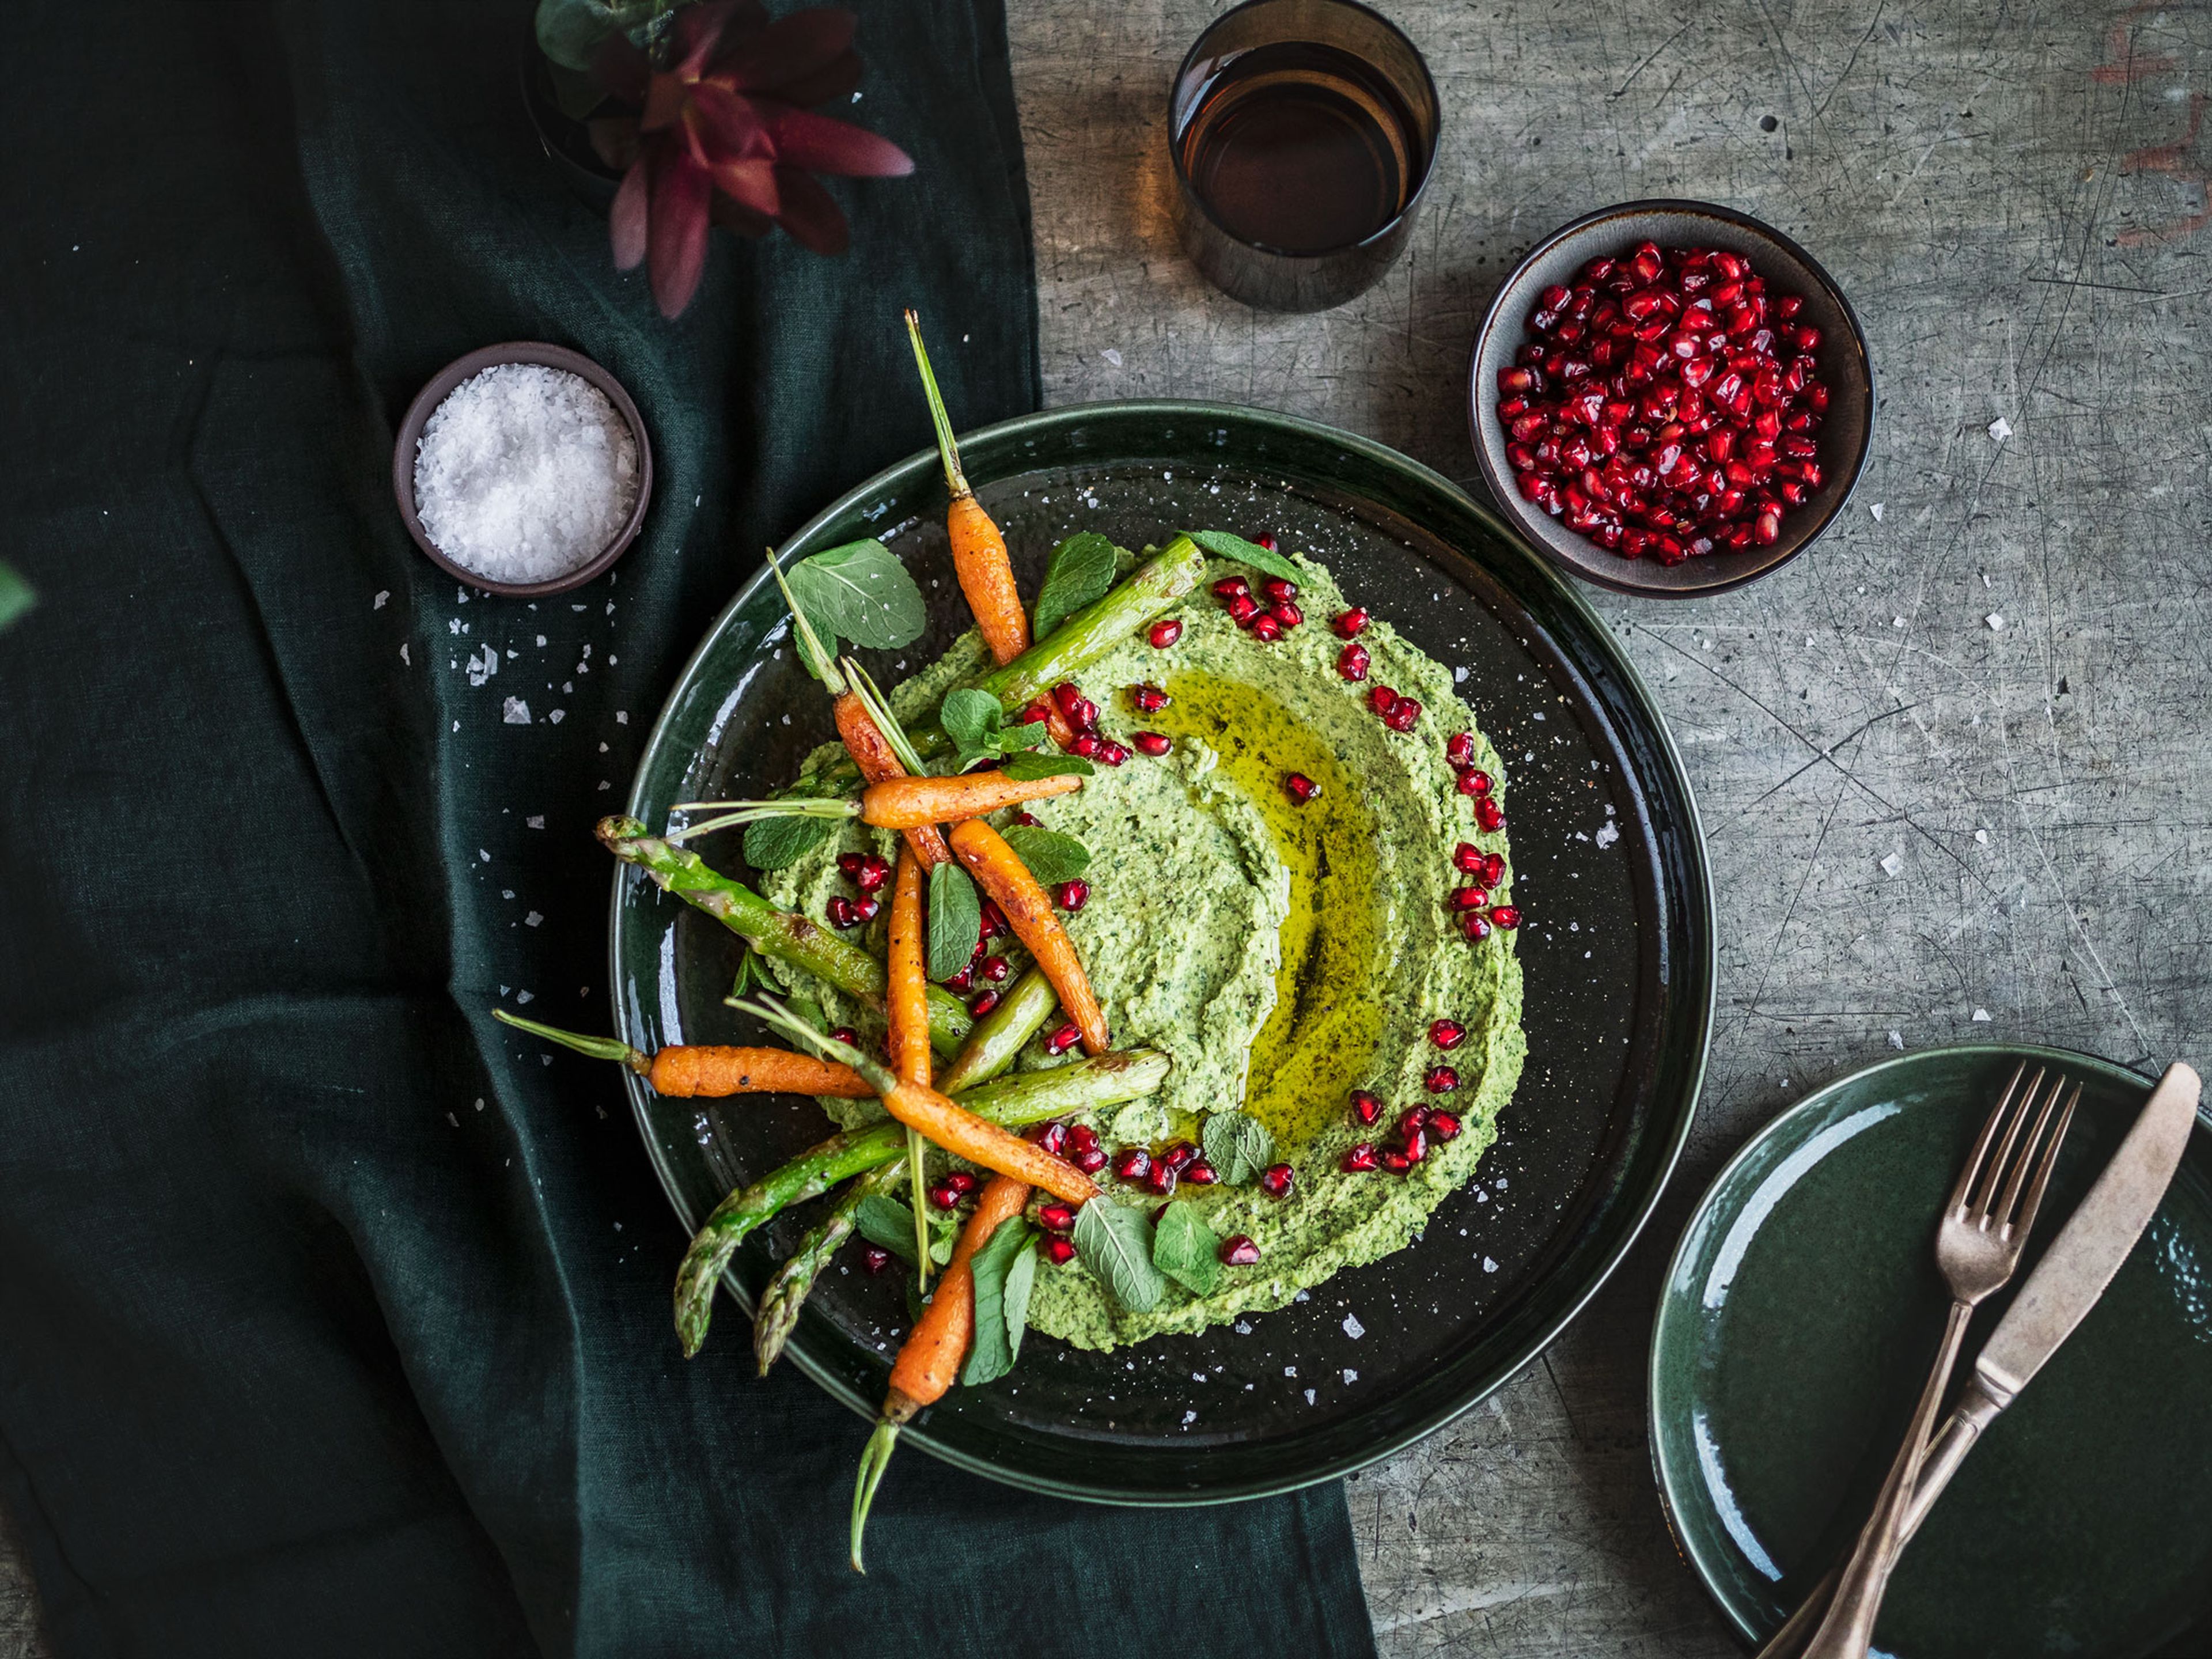 Add hummus to a serving plate, top with the charred carrots and asparagus, and garnish with pomegranate seeds and a drizzle of olive oil. Enjoy!